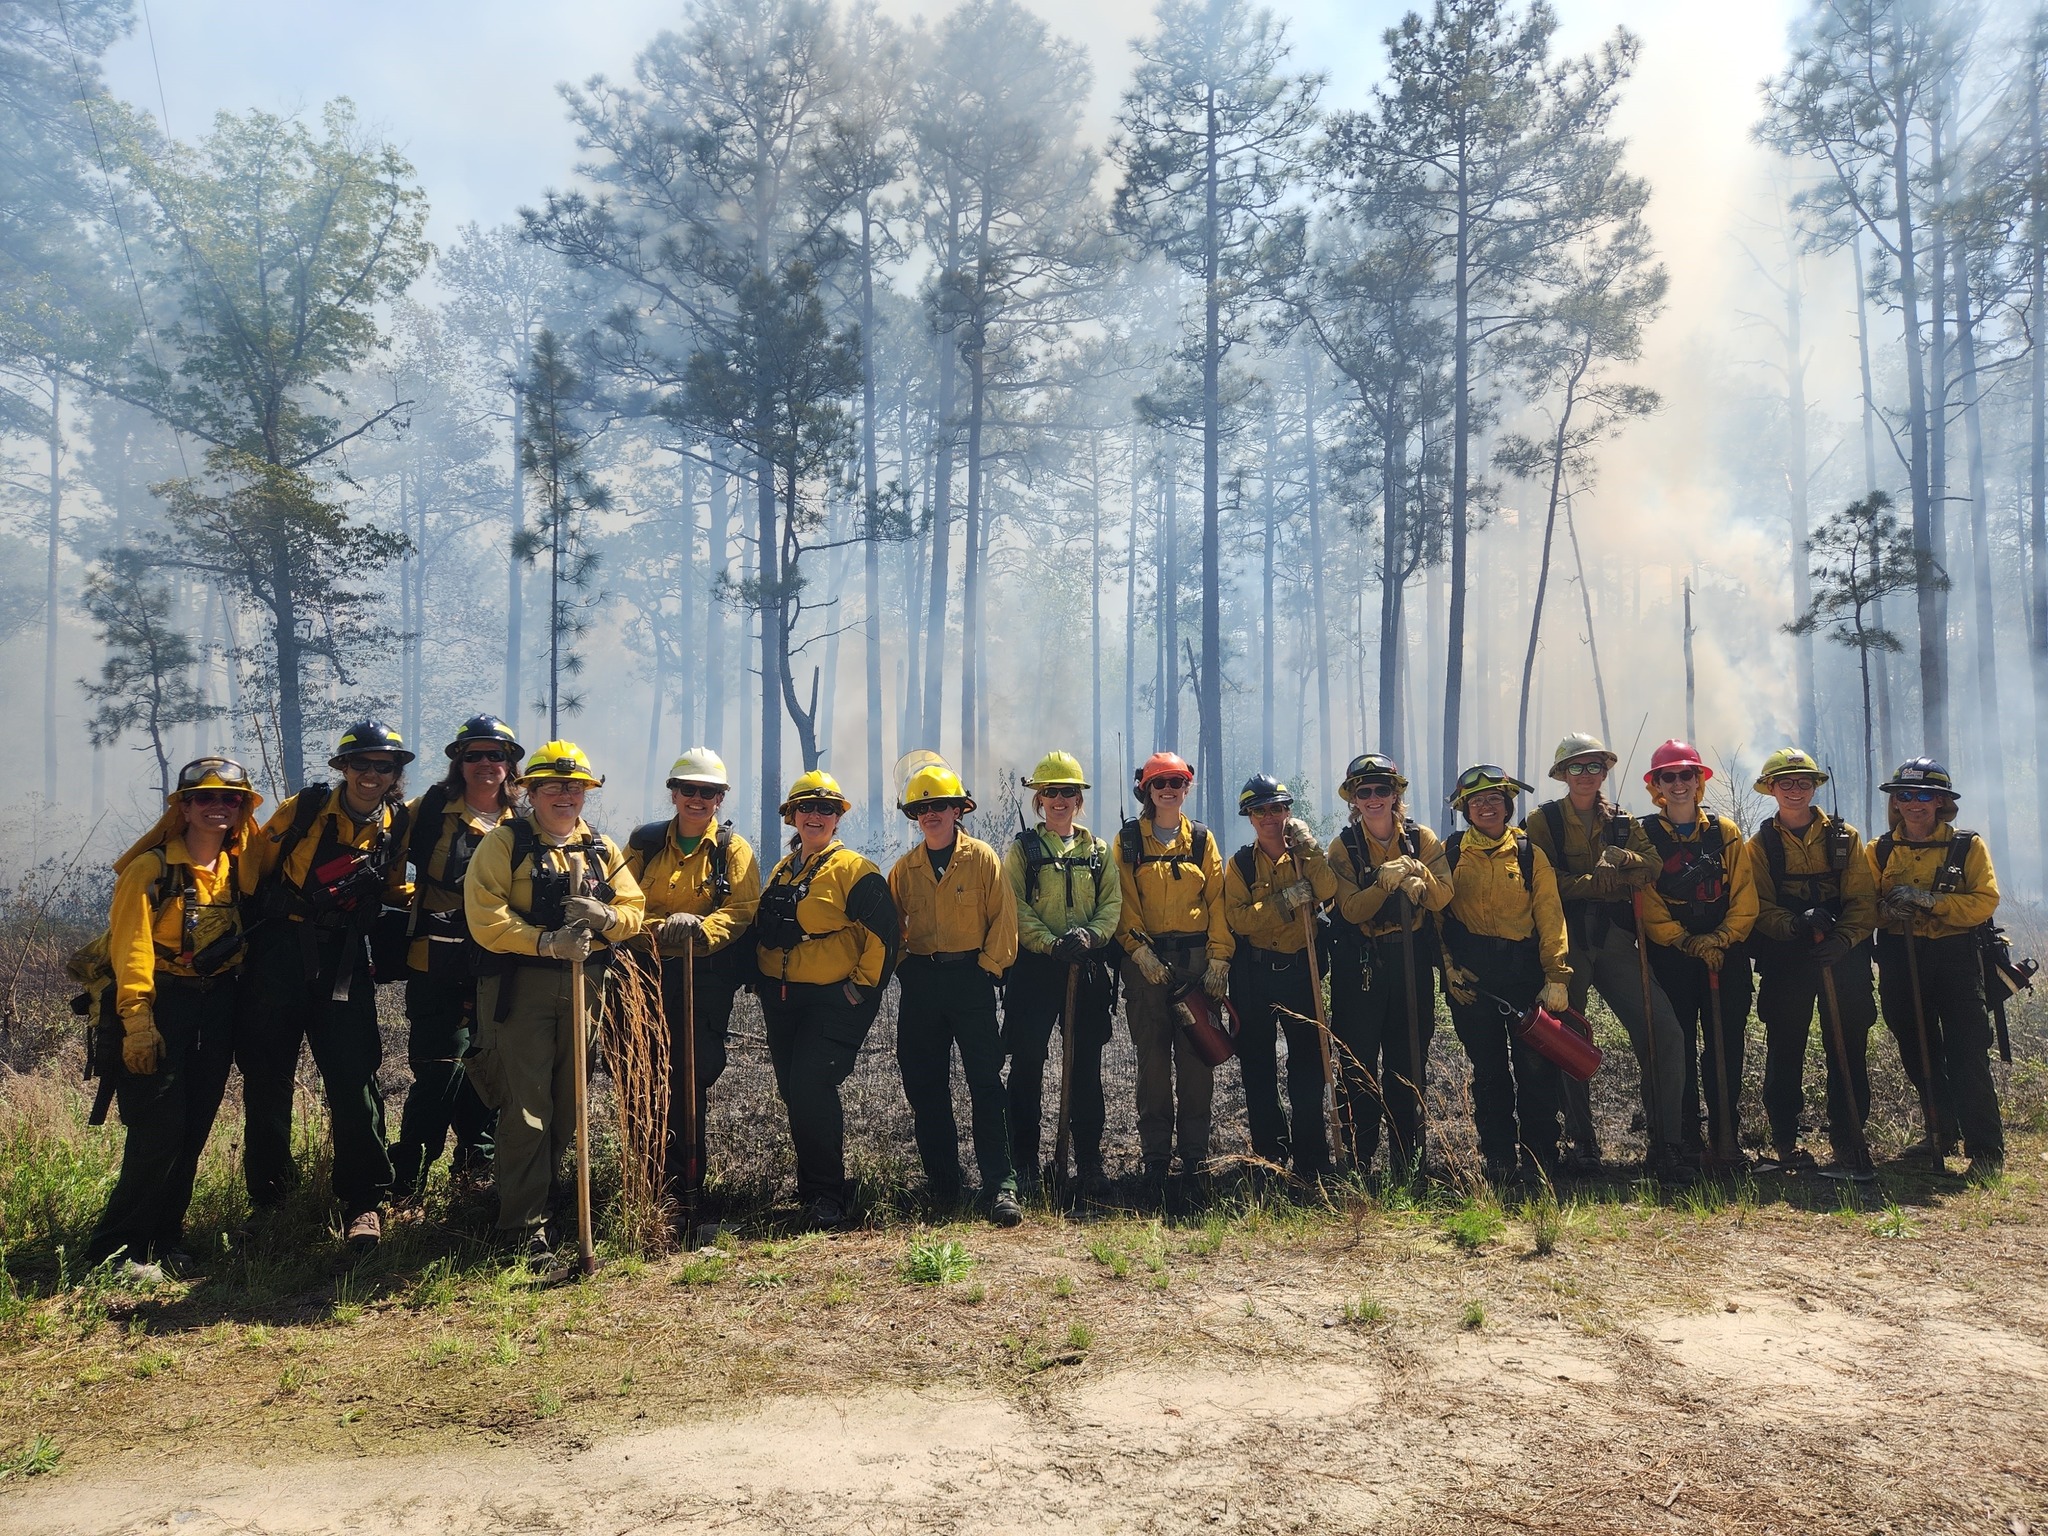 A group of fire practioners pose together in a line during a controlled burn.